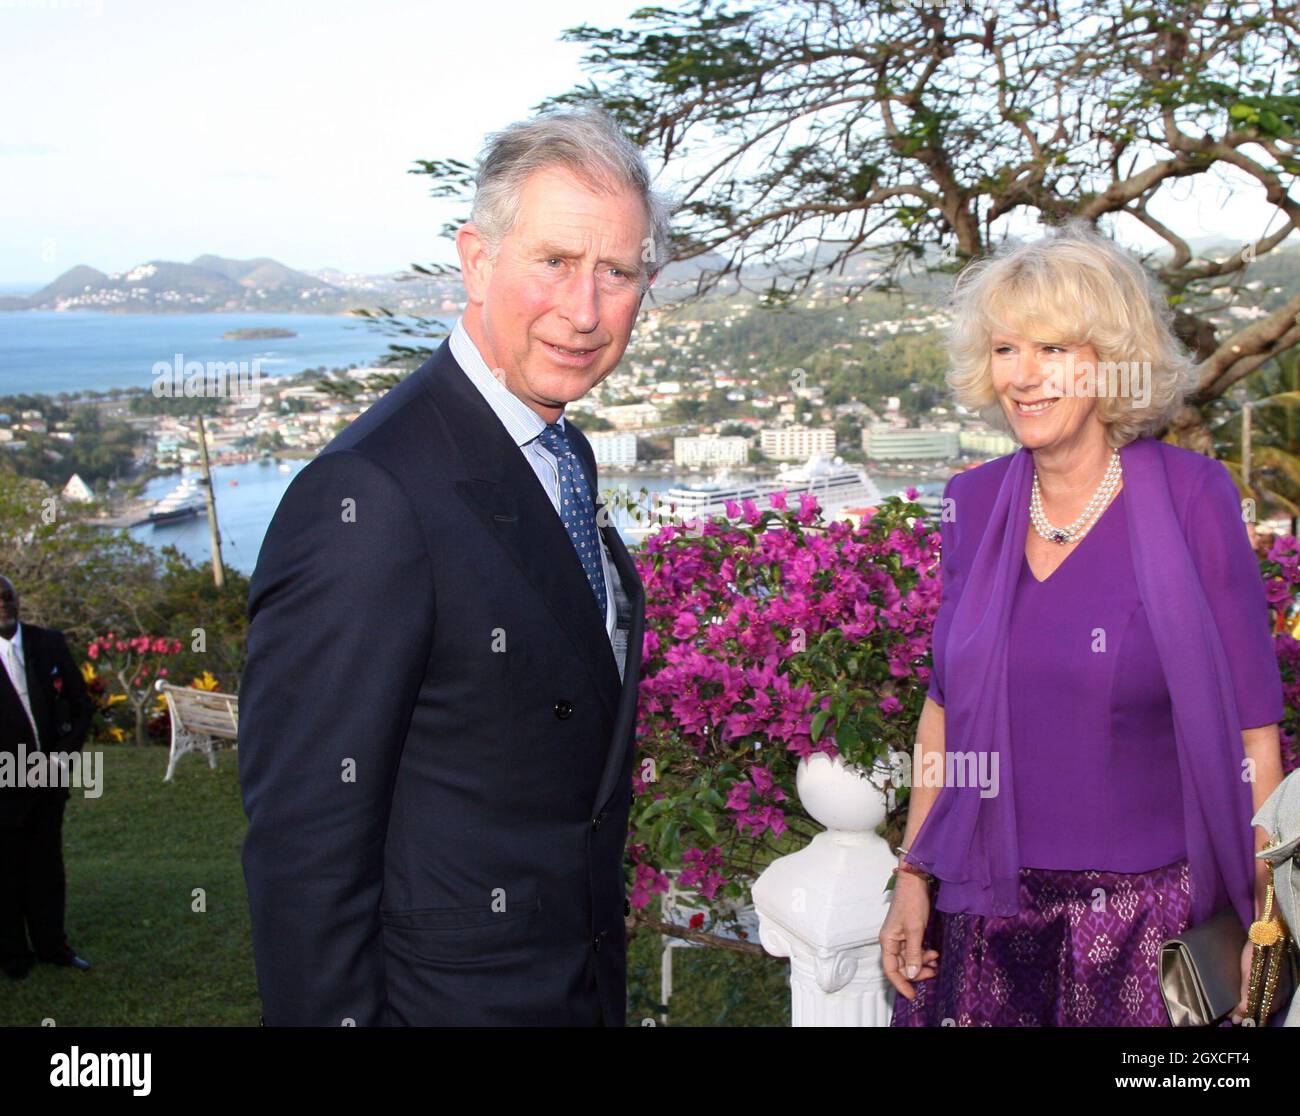 Prince Charles, Prince of Wales and Camilla, Duchess of Cornwall pose in the gardens of the Governor General's Residence in Castries, St. Lucia on March 7, 2008. Stock Photo